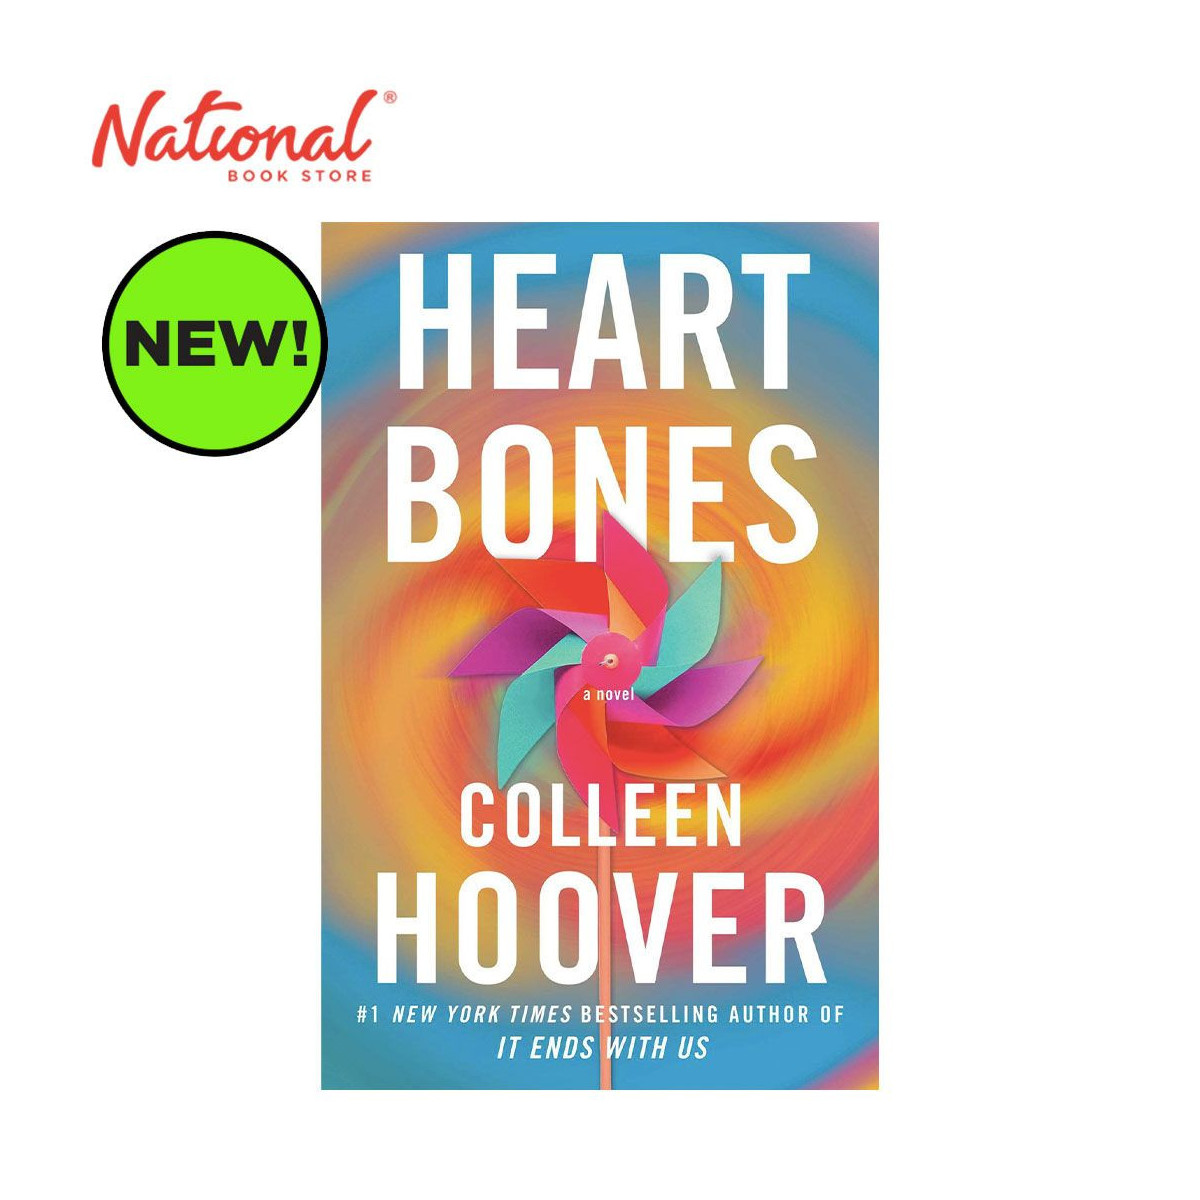 Heart Bones by Colleen Hoover - Trade Paperback - New Adult Fiction